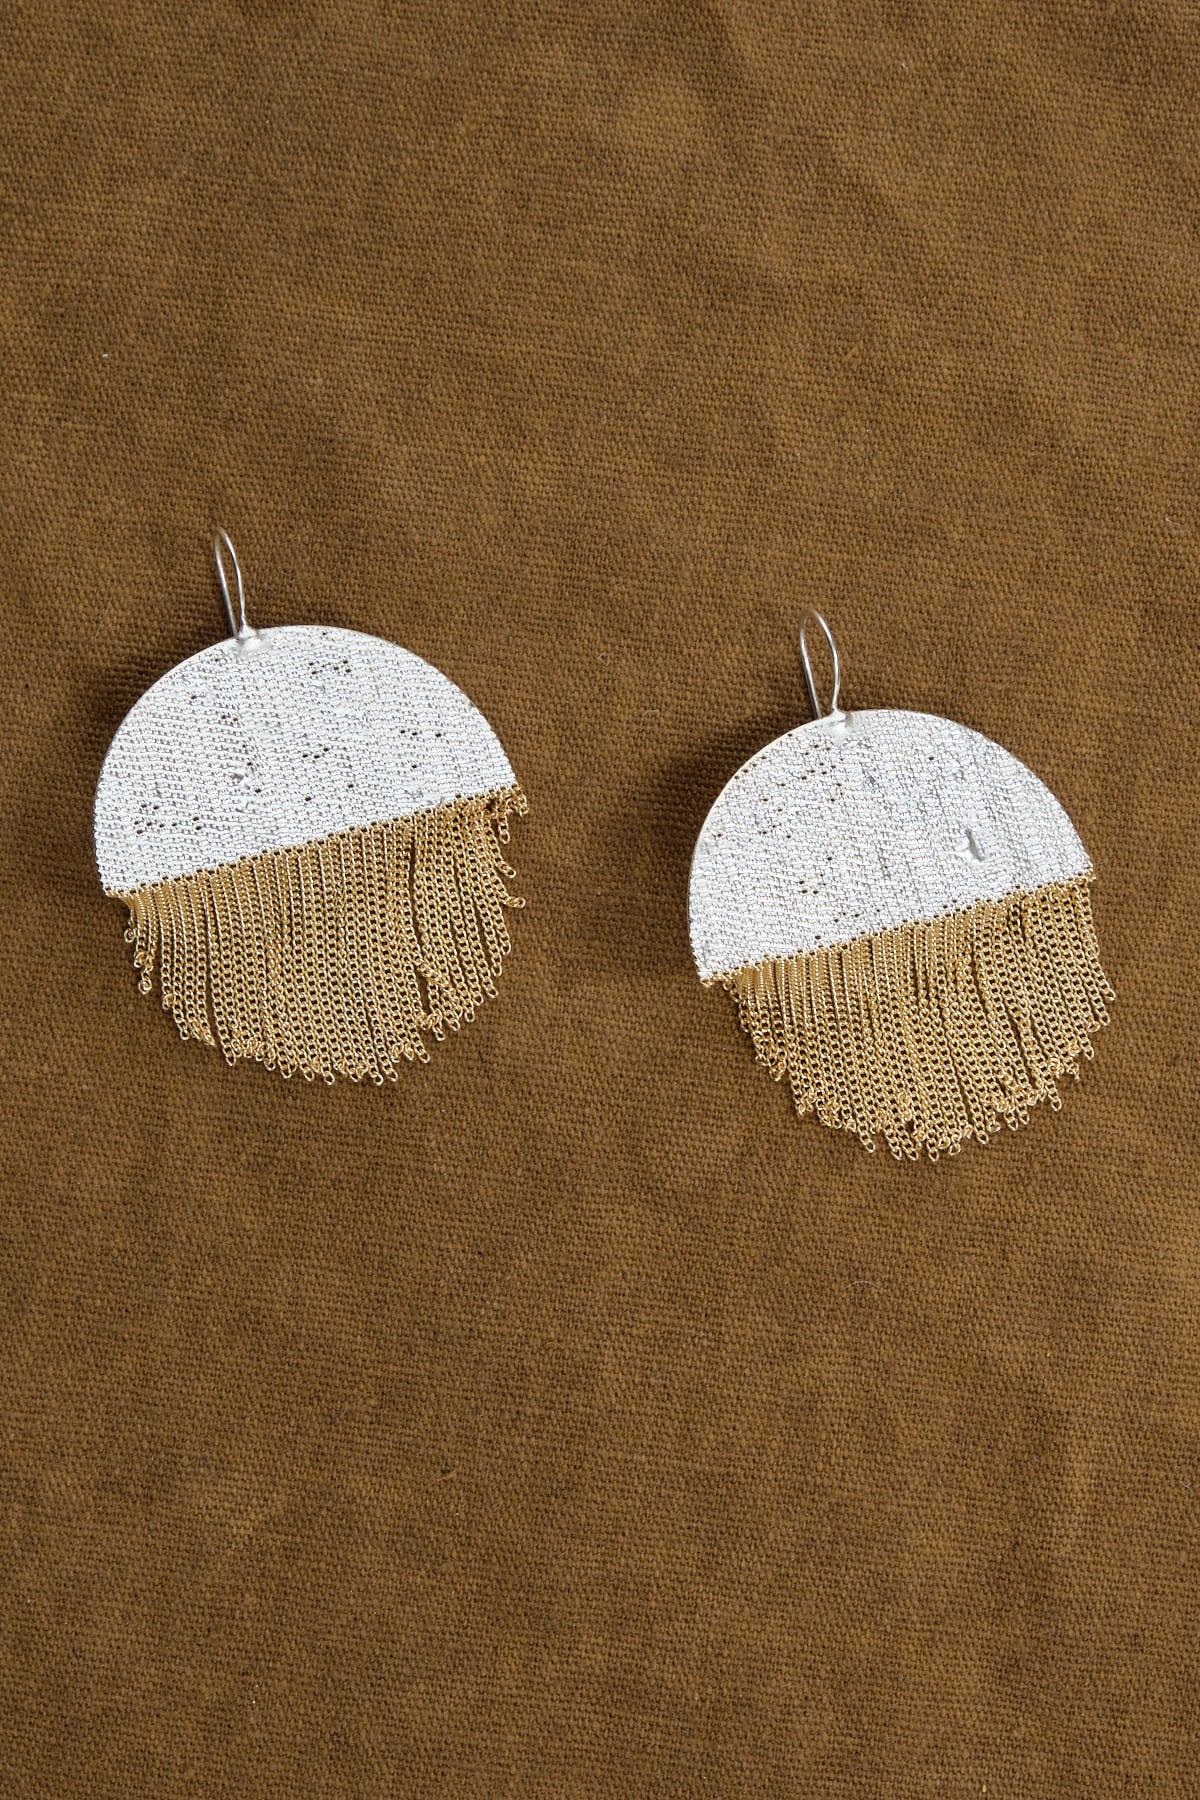 Hannah Keefe Sterling Silver and Brass Peach Earrings